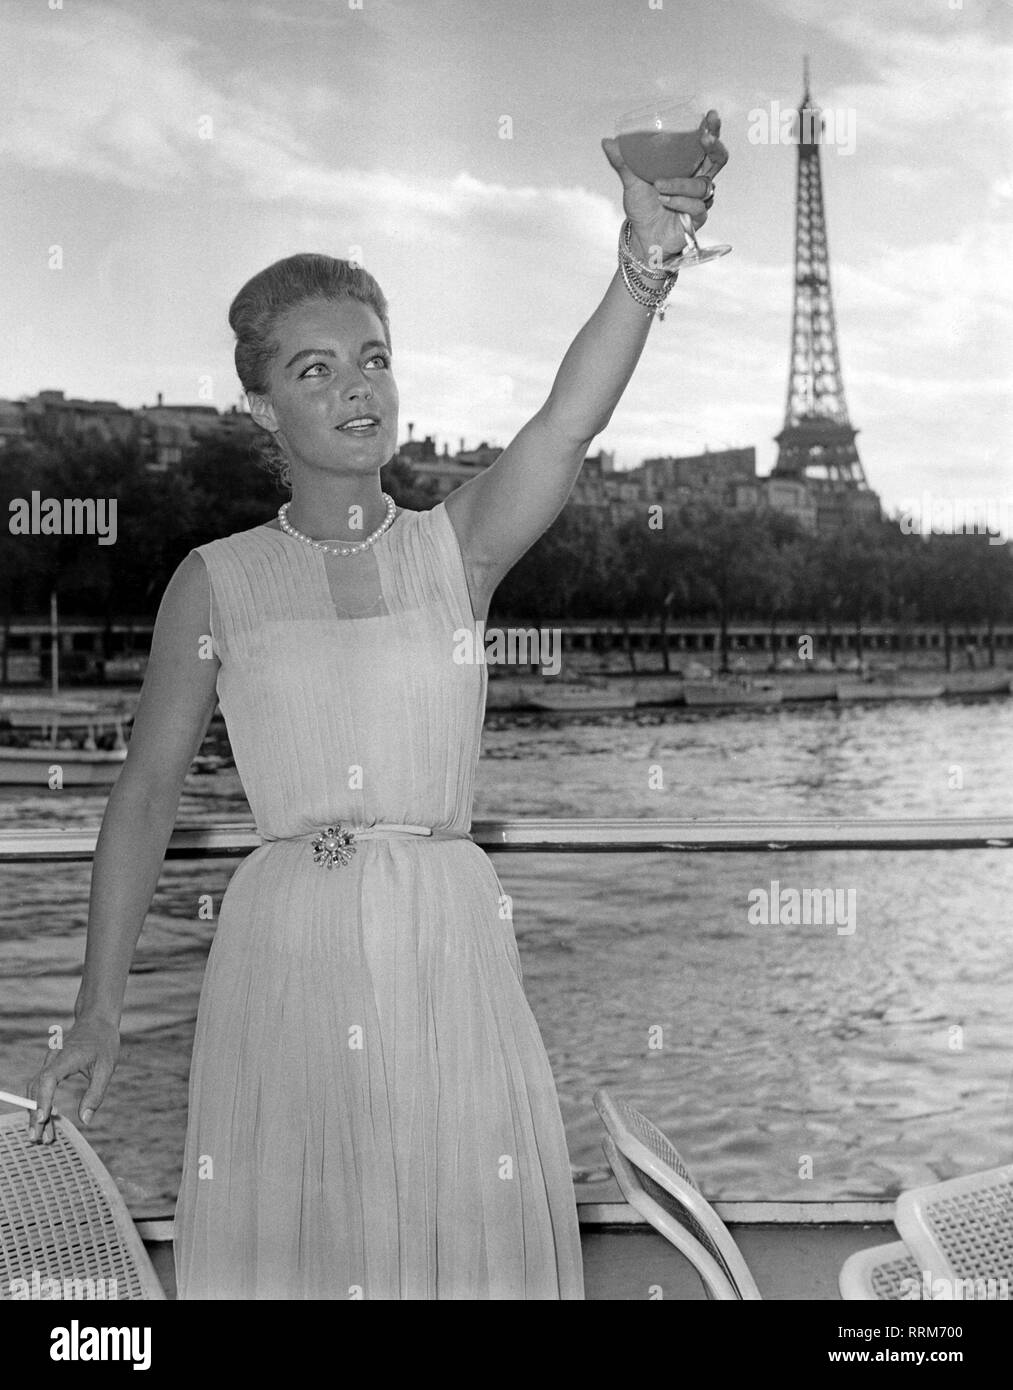 Schneider, Romy, 23.9.1938 - 29.5.1982, German actress, half length, Paris, 1965, Additional-Rights-Clearance-Info-Not-Available Stock Photo